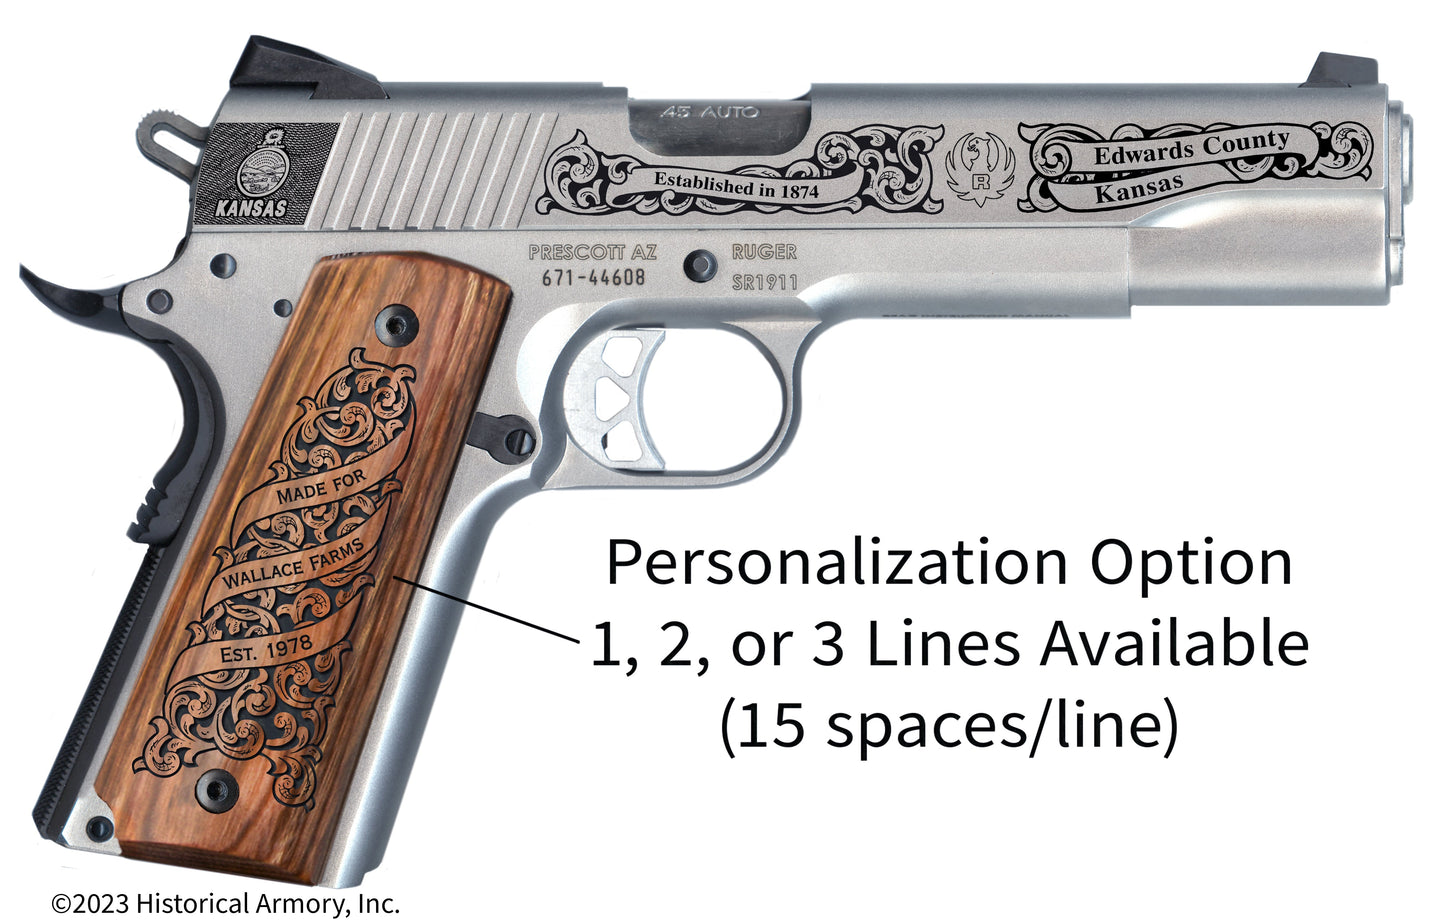 Edwards County Kansas Personalized Engraved .45 Auto Ruger 1911